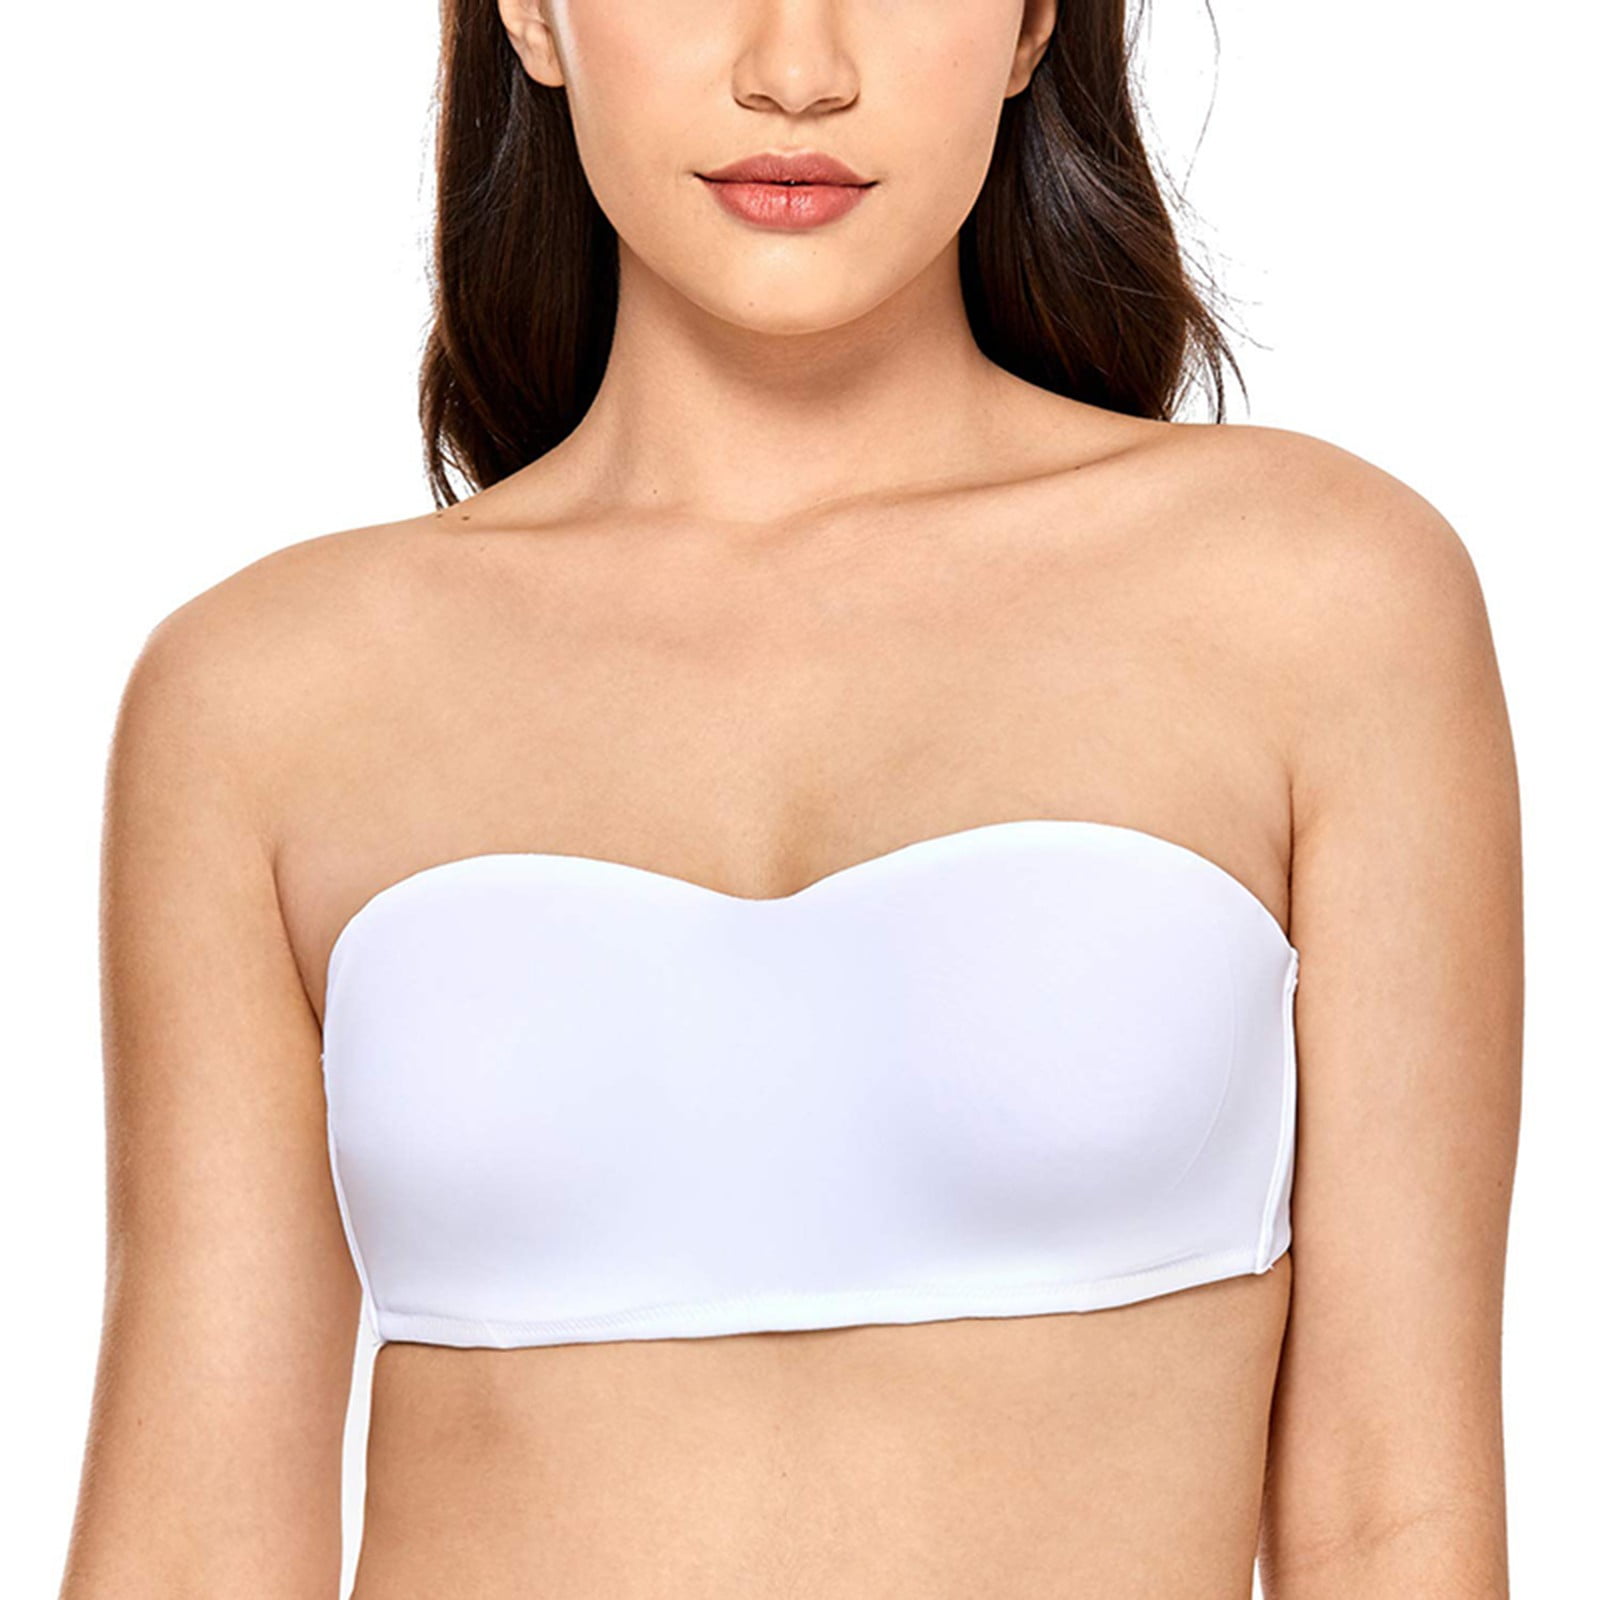 EHQJNJ Nursing Bra Women'S Bandeau Bra Strapless Padded Strapless Bra Push  up with Non Slip Silicone Transparent Straps Women'S Tube Top Bralette  without underwire Strapless Bras for Women Push up 